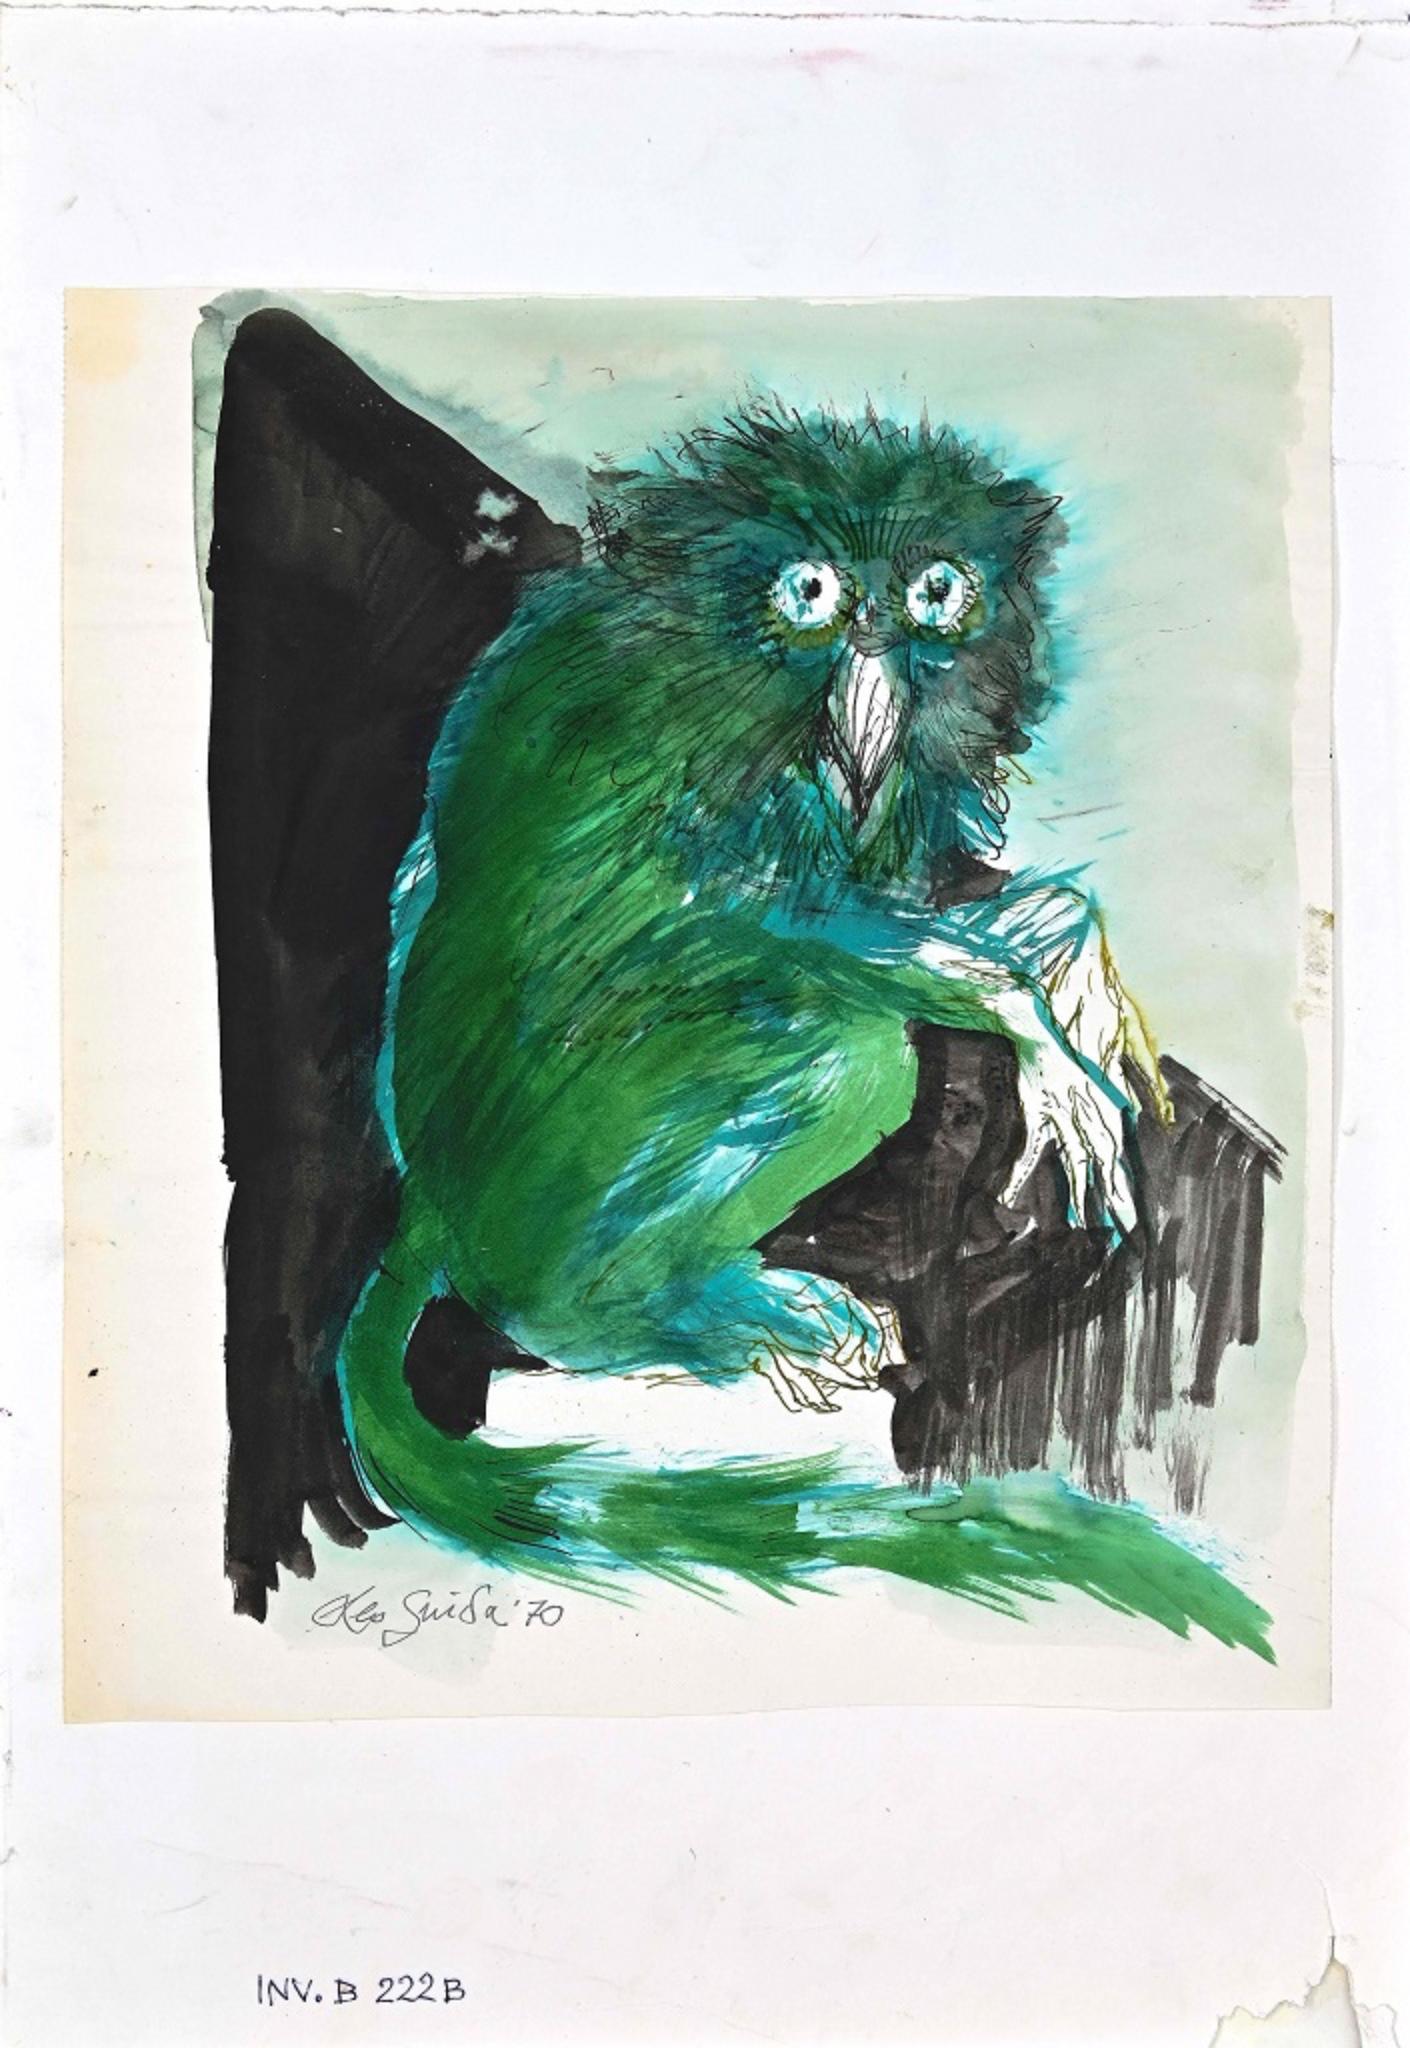 The Owl is an original Contemporary artwork realized in 1970 by the italian artist Leo Guida.

Hand-signed and dated in pencil on the lower left corner: Leo Guida '70. 

Mixed media: watercolor, china ink and tempera on paper. 

The painting is